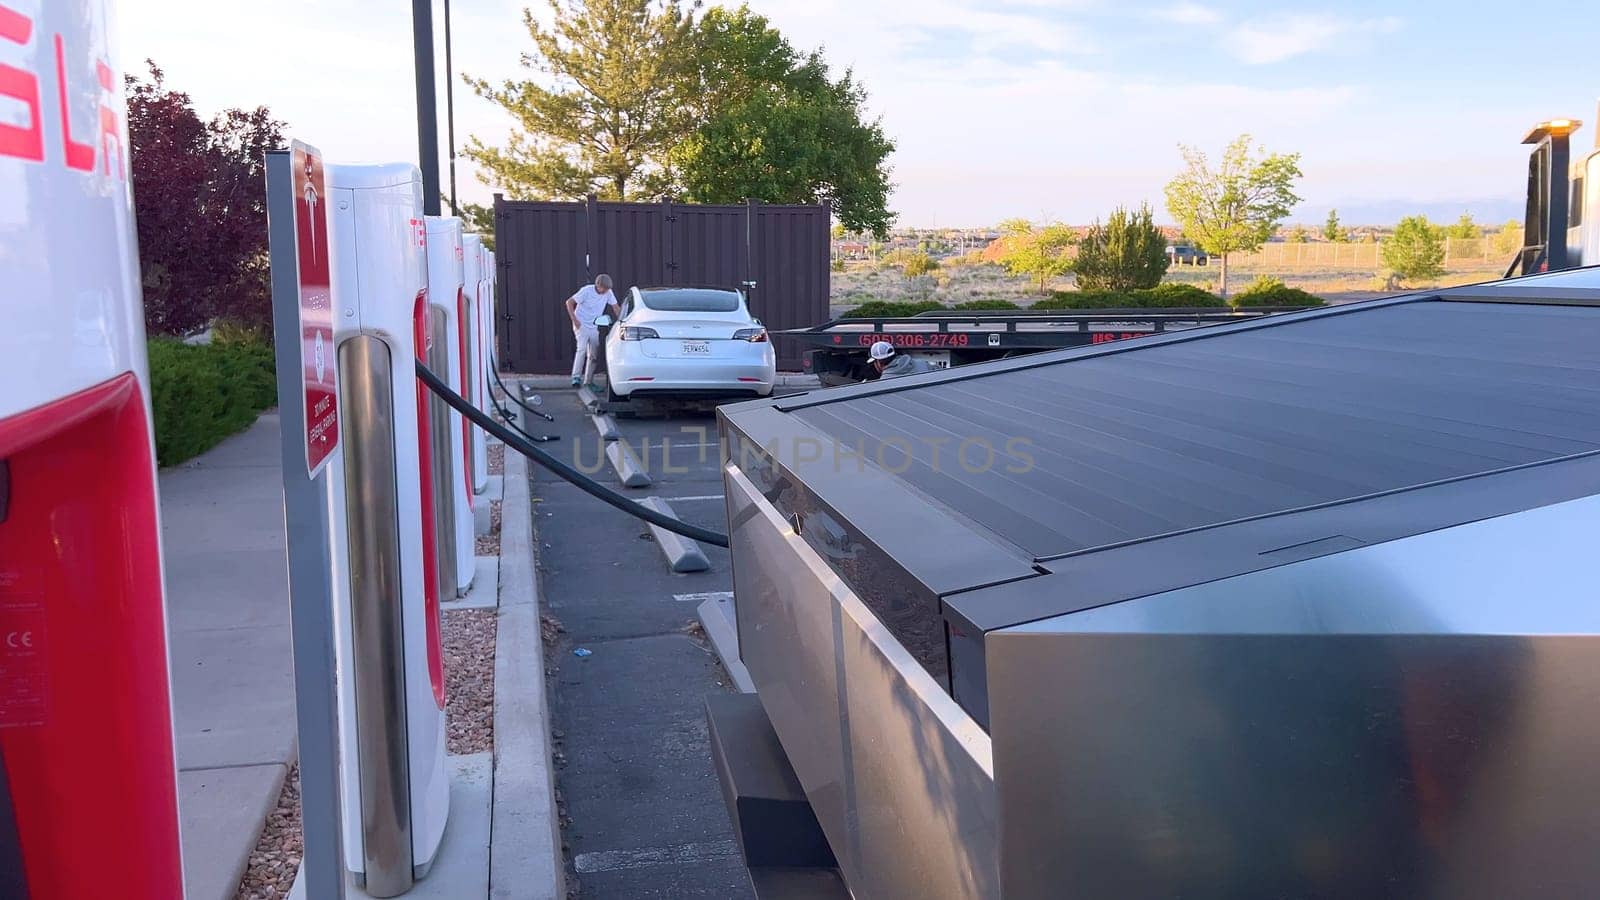 Tesla Cybertruck Charging at Outdoor Supercharger Station by arinahabich